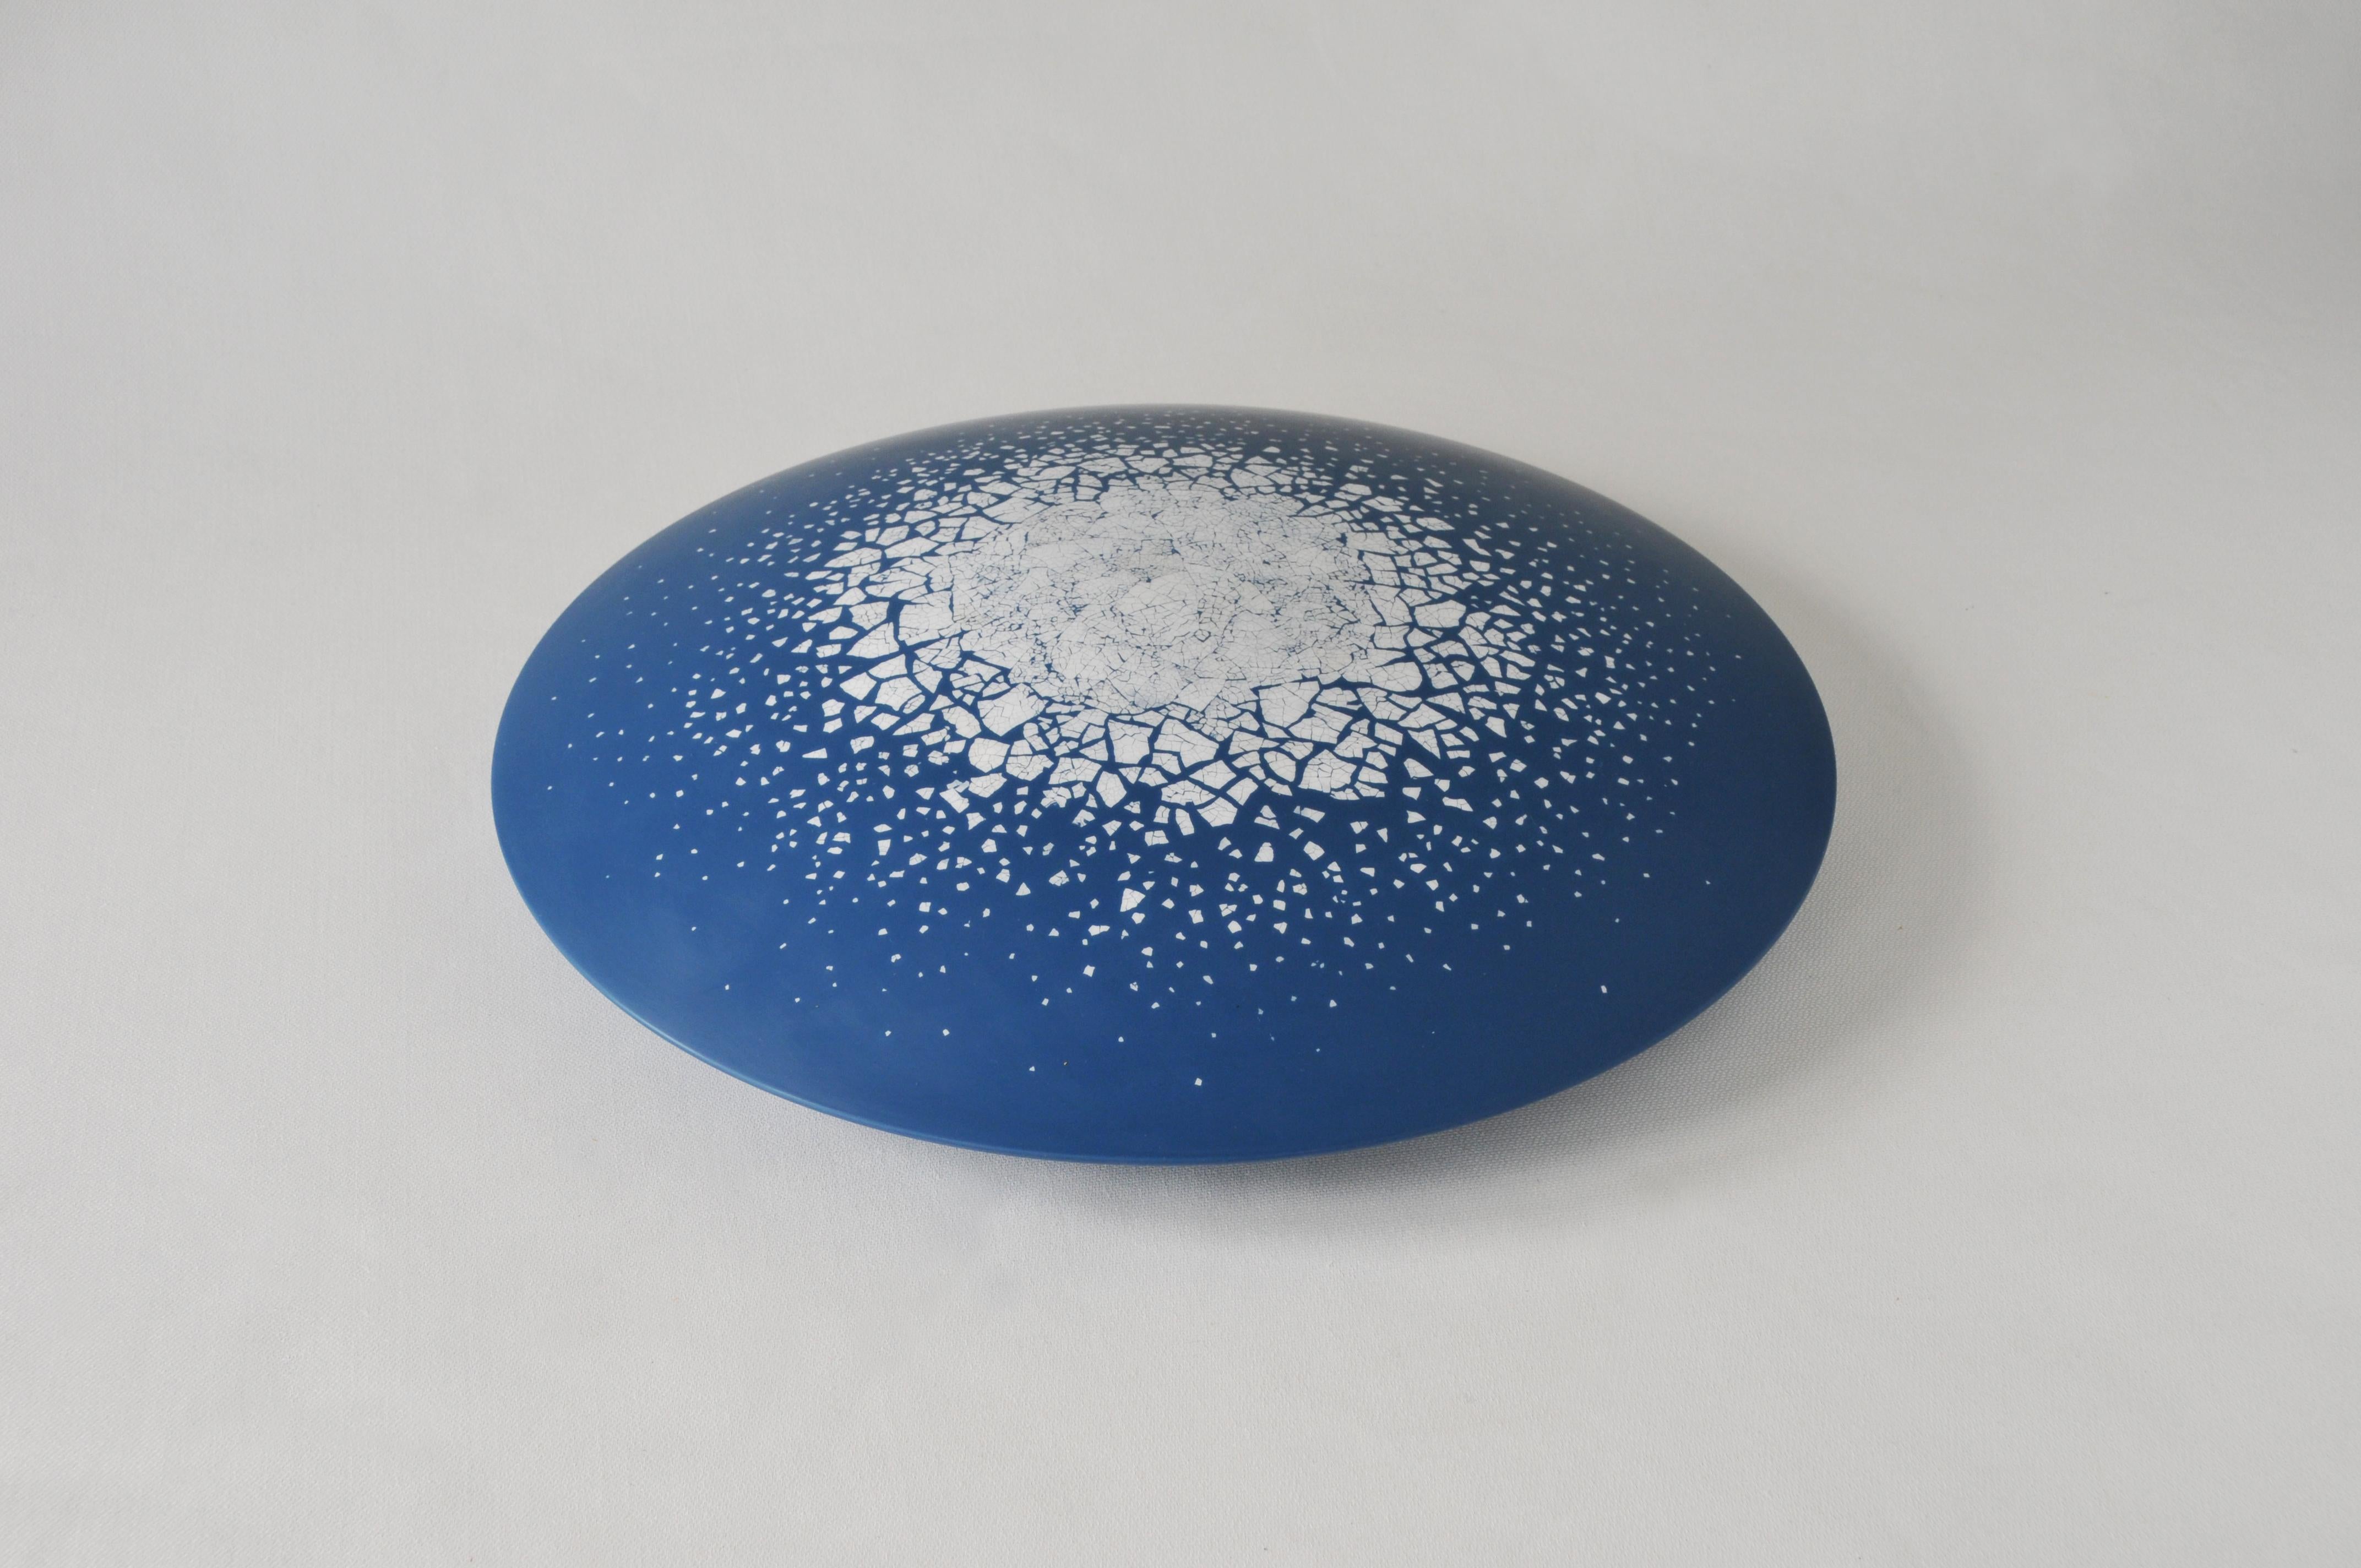 Round wall art sculpture of lacquered pearwood and eggshell. Minute pieces of eggshell, meticulously placed, appear to float like icebergs in intensely blue arctic waters. Influenced by early 20th century masters such as Majorelle, Gallé, the artist